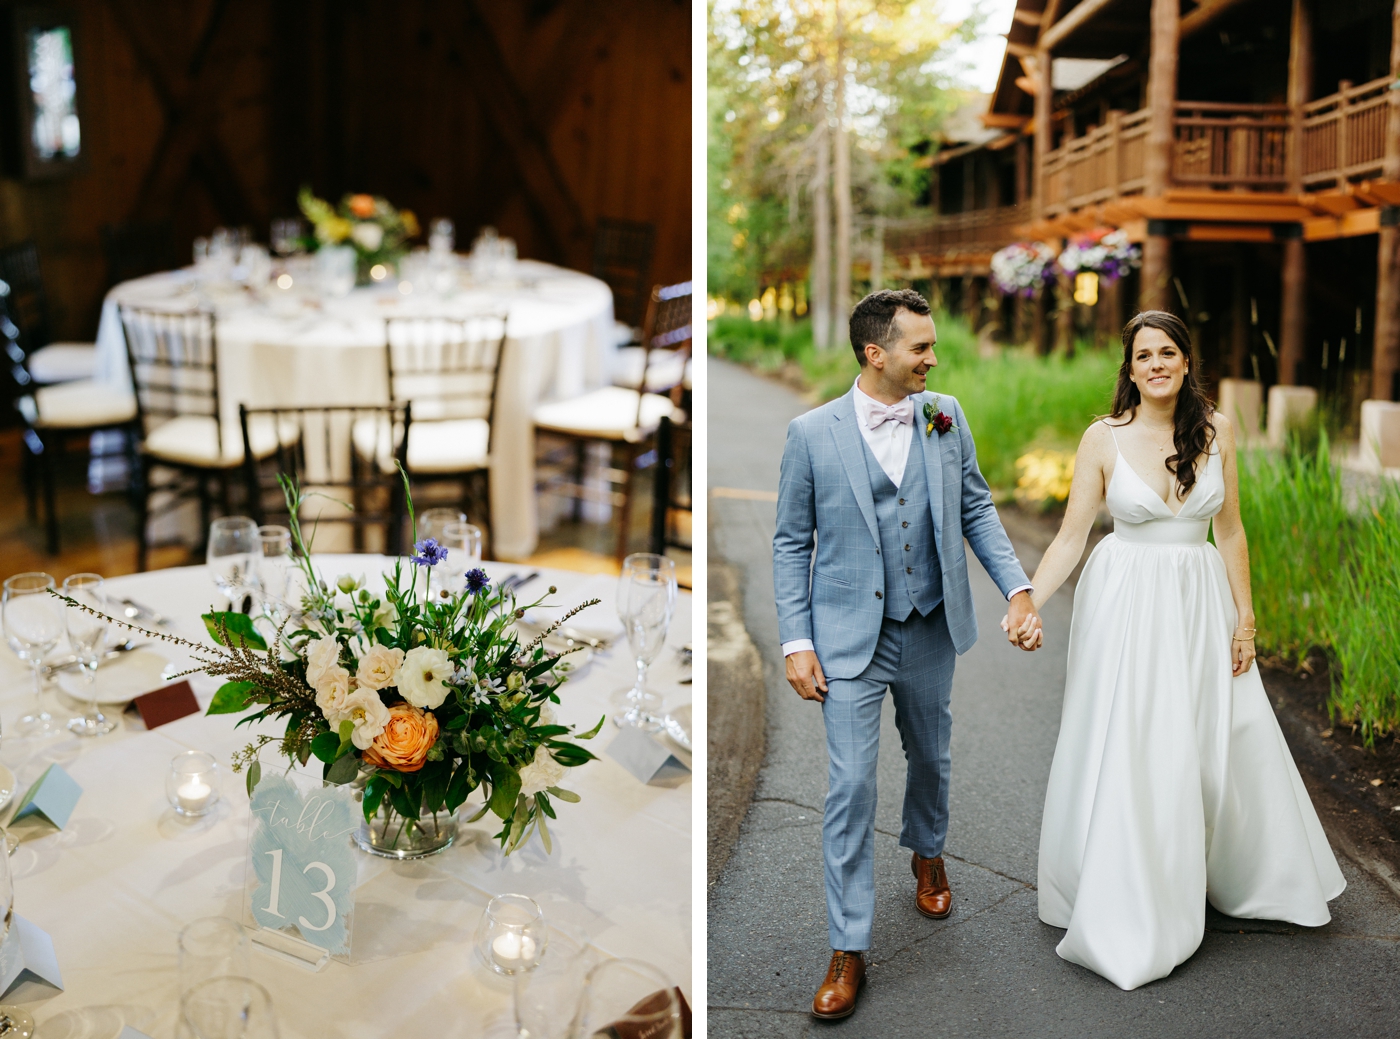 Wedding planning timeline examples, featuring a wedding at Sunriver Resort in Oregon